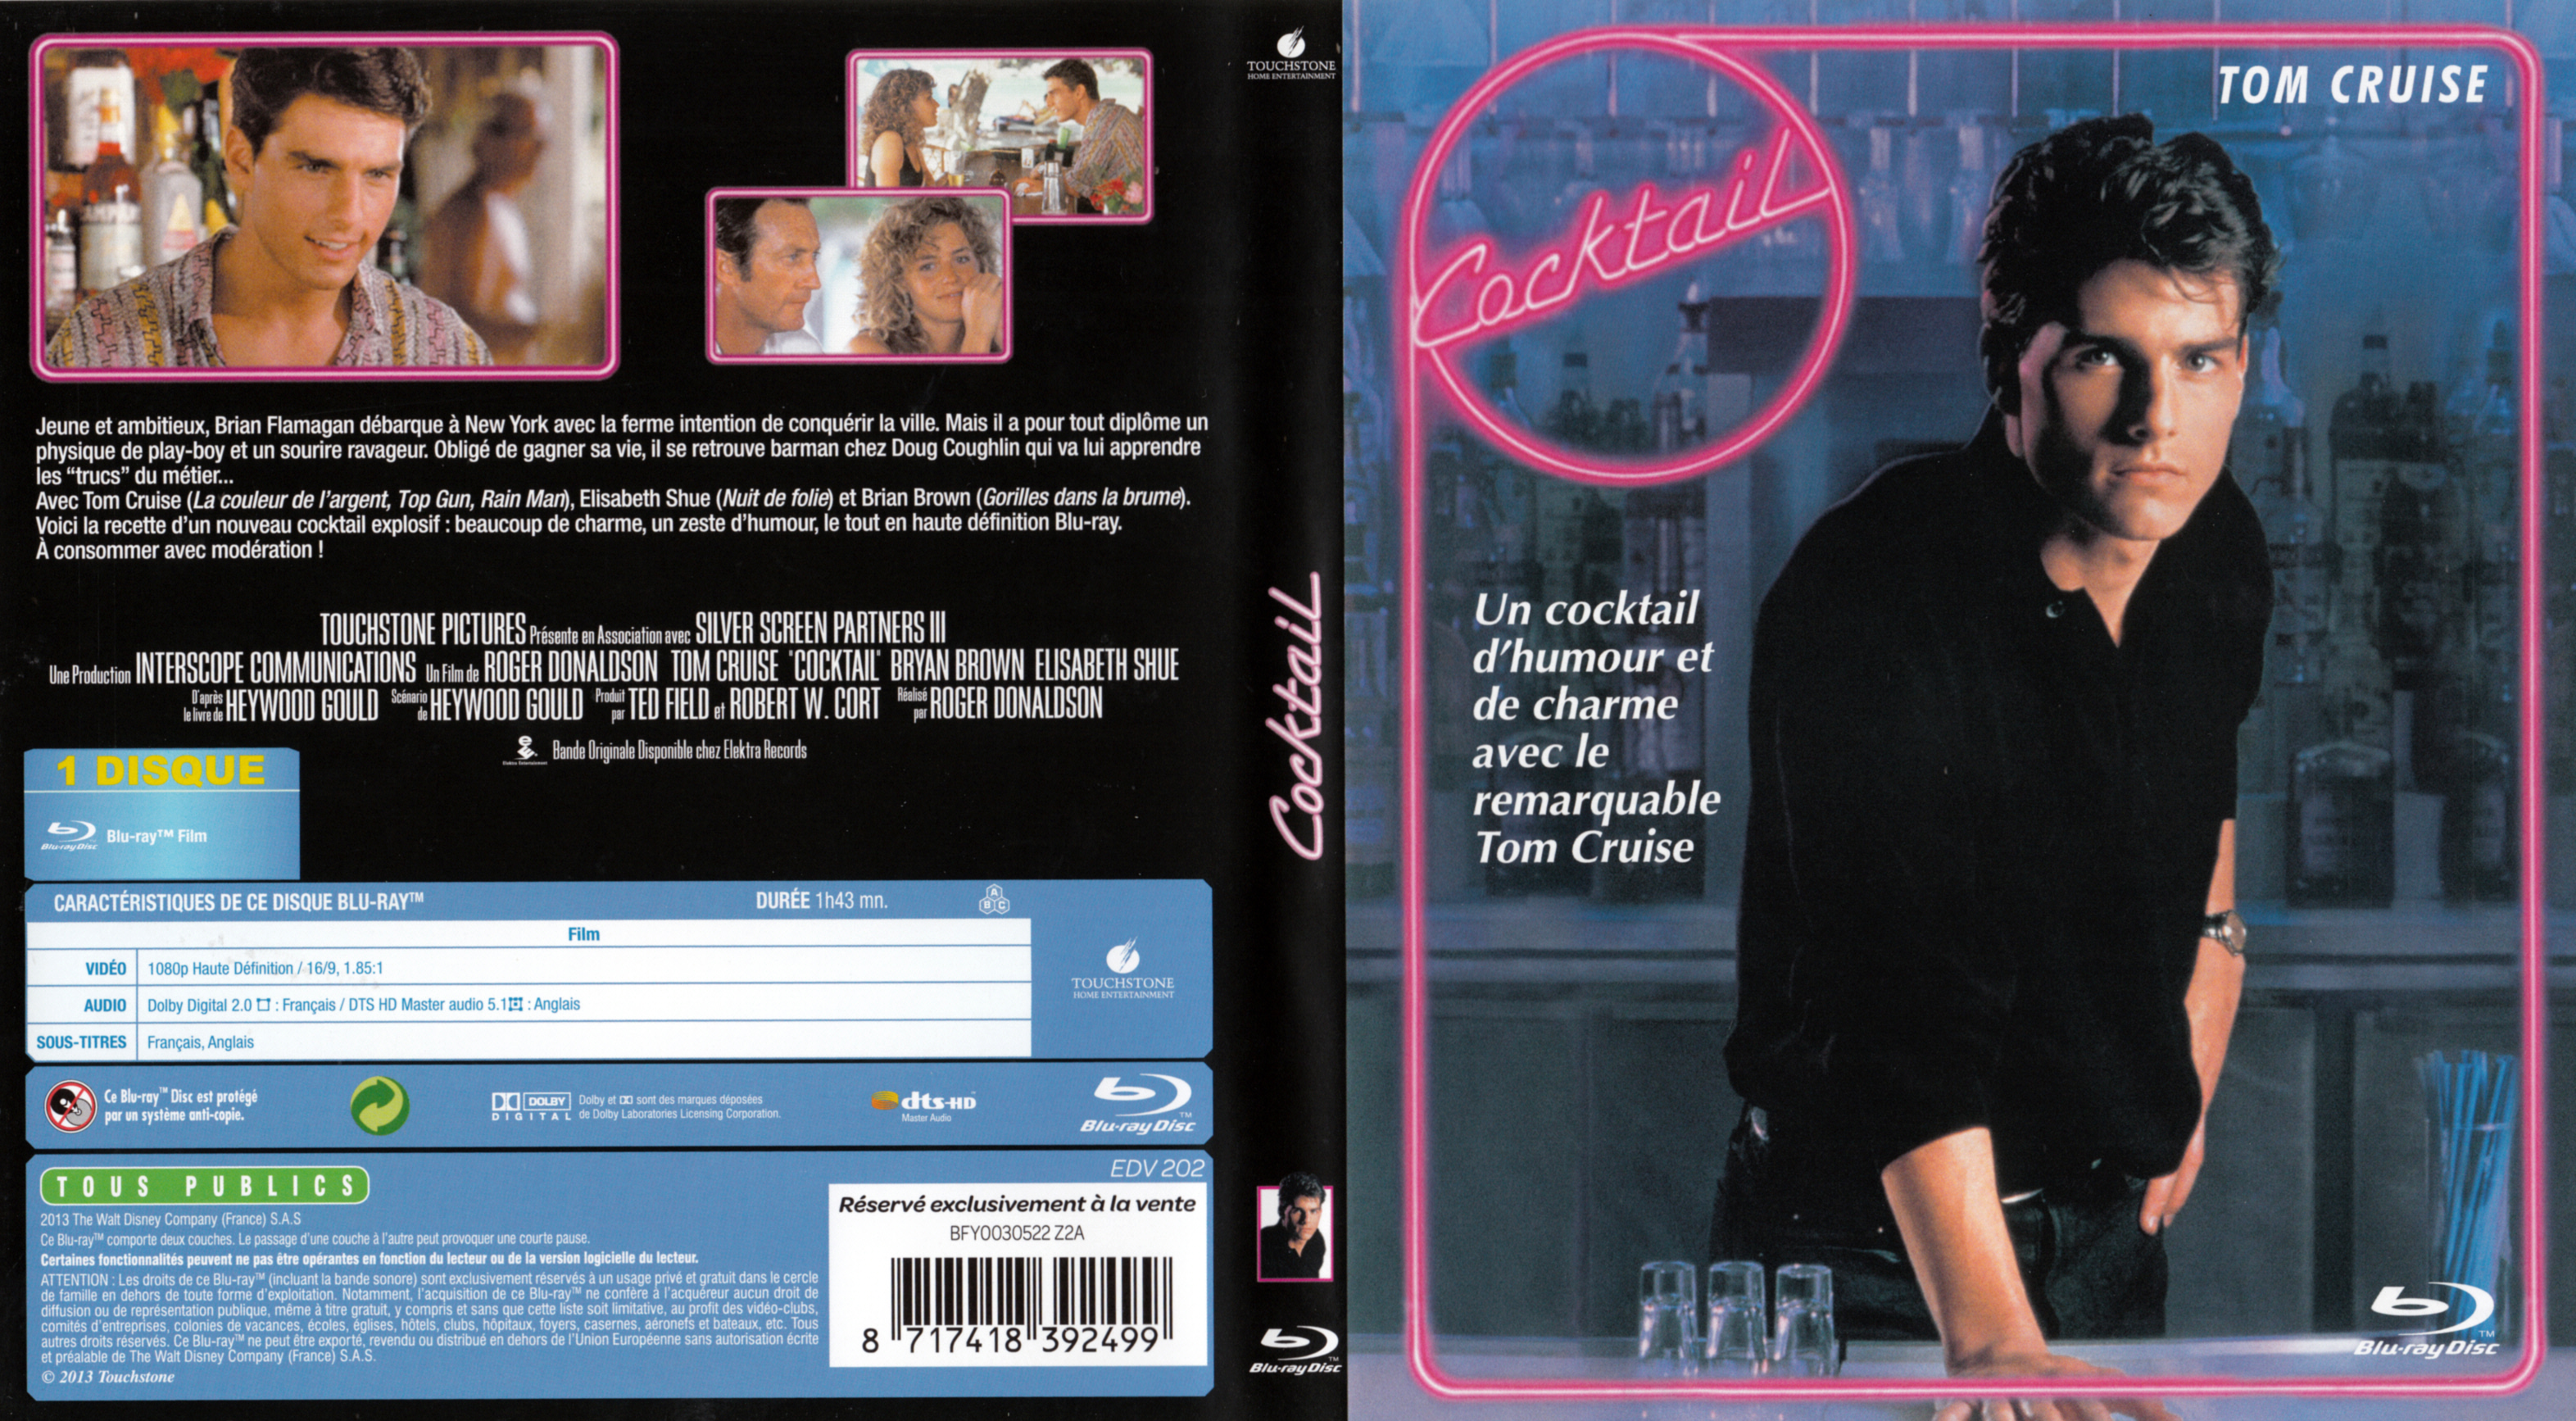 Jaquette DVD Cocktail (BLU-RAY)